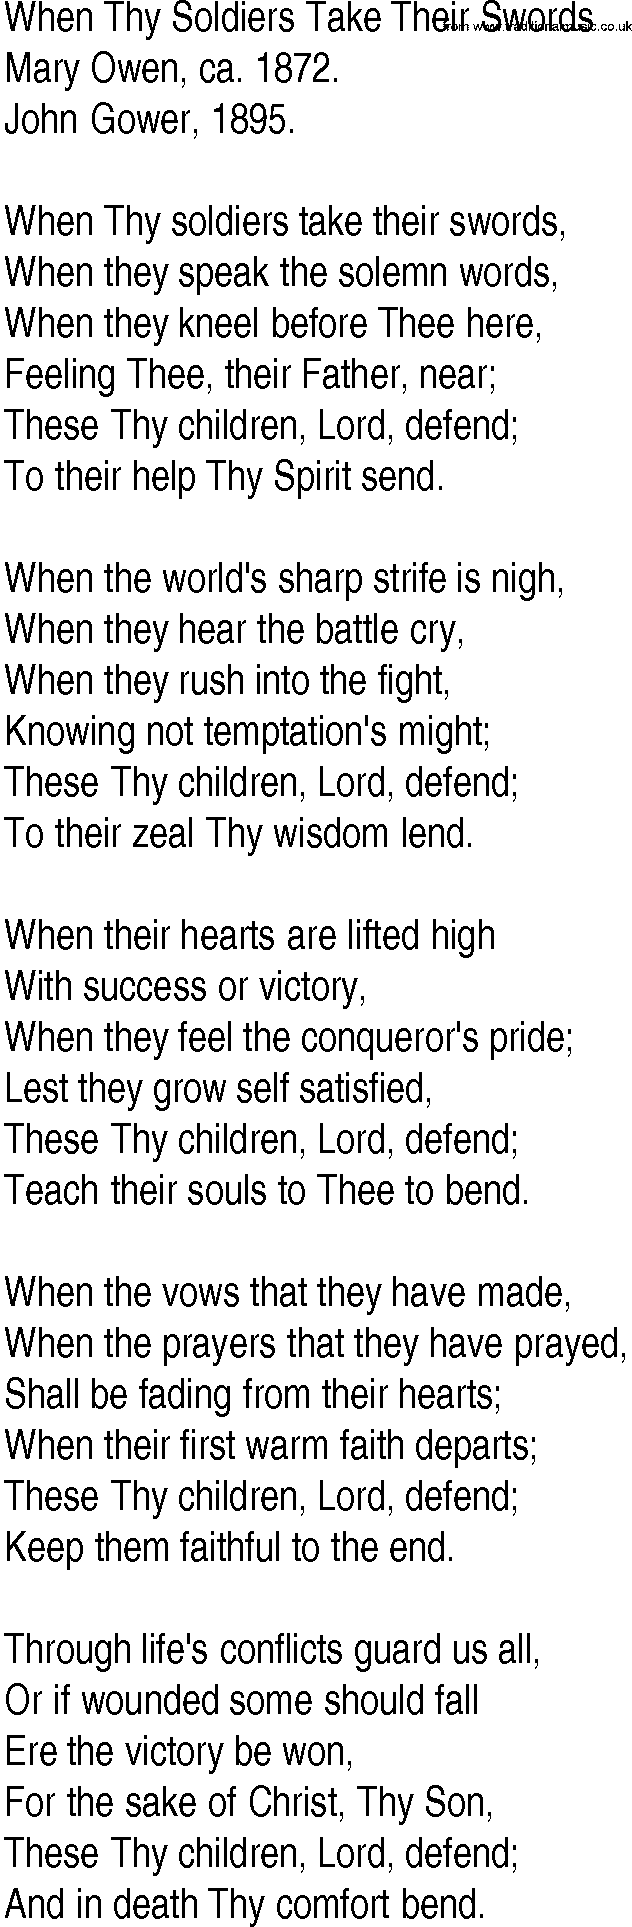 Hymn and Gospel Song: When Thy Soldiers Take Their Swords by Mary Owen ca lyrics